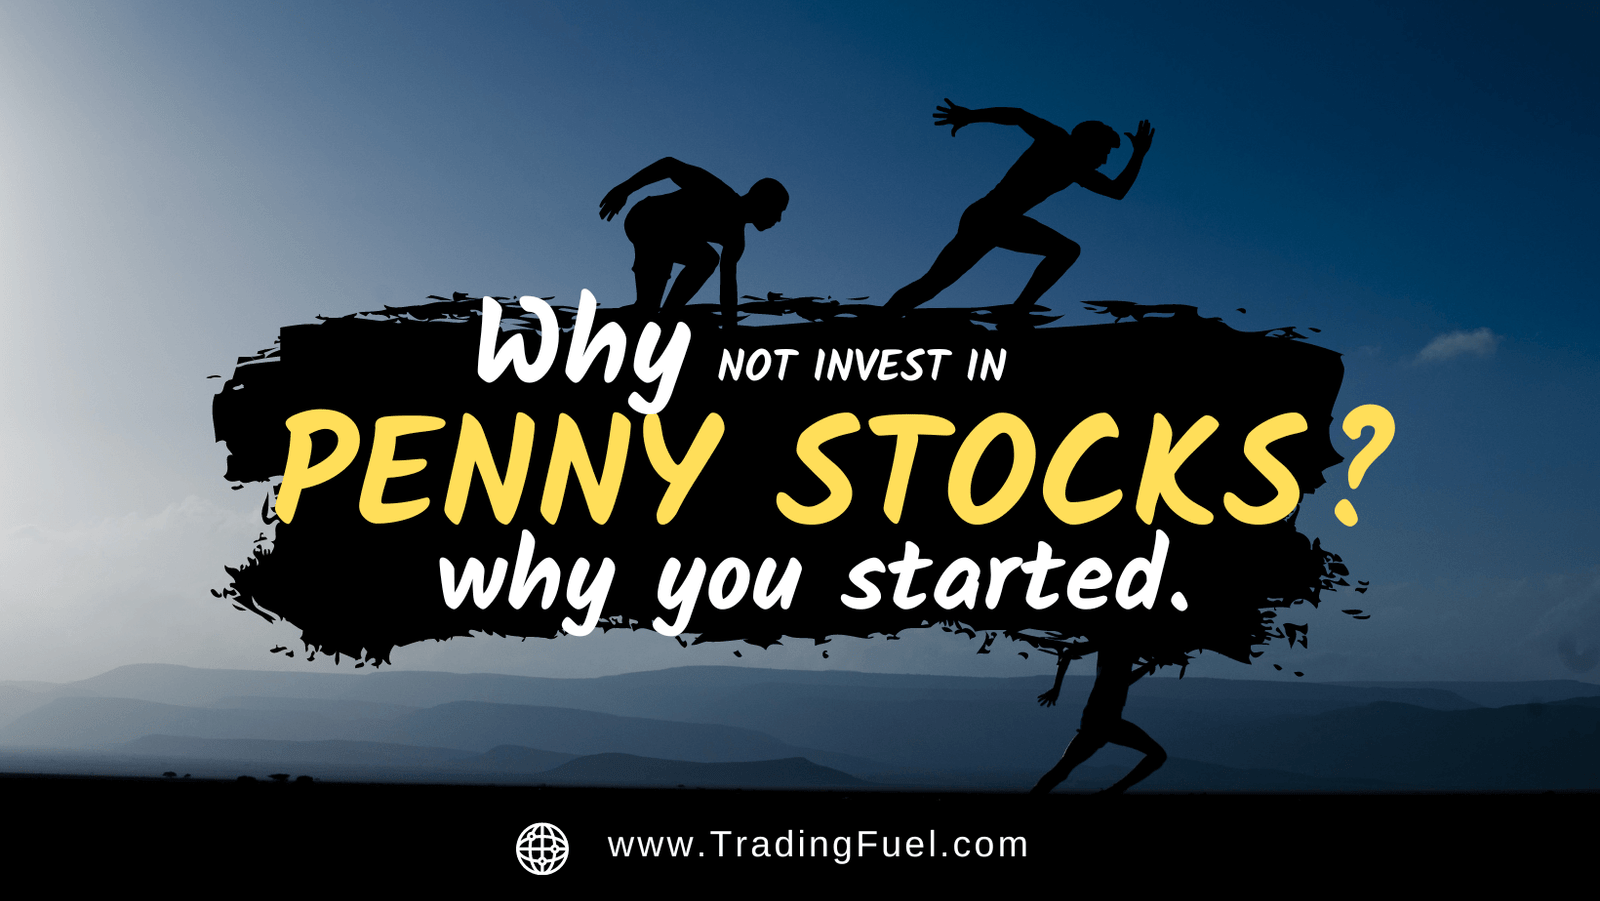 Why not Invest in Penny Stocks?